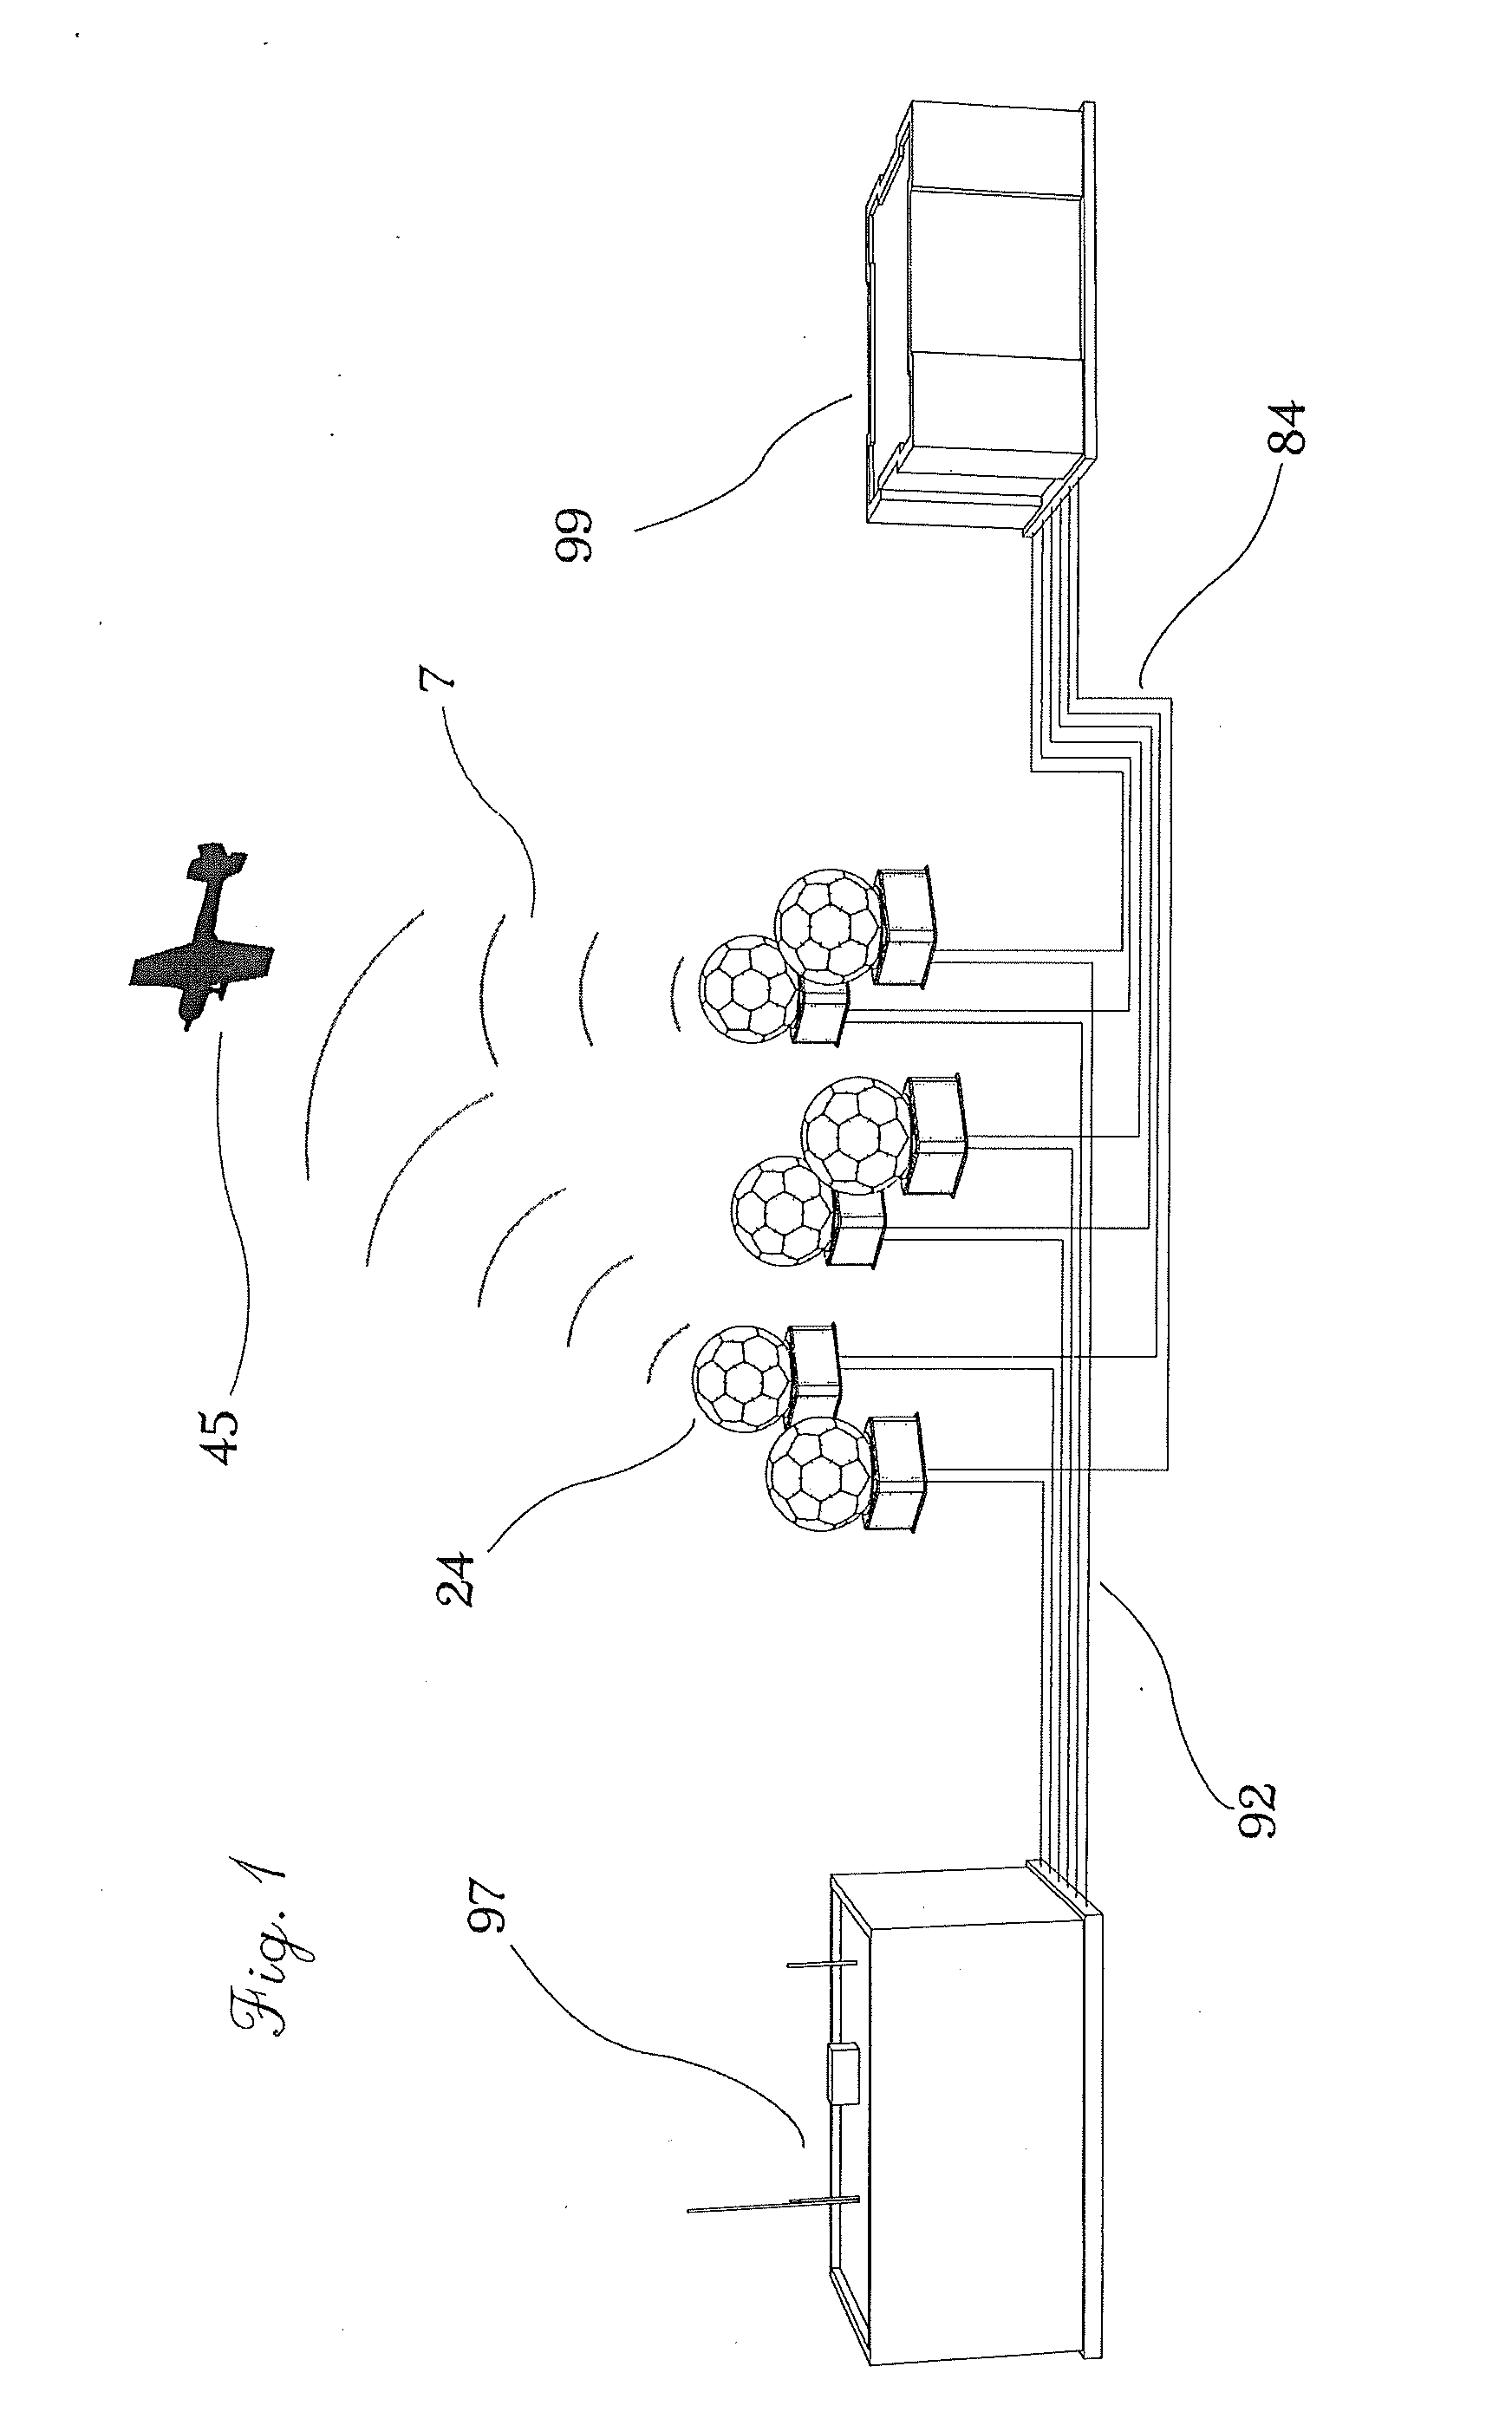 System and method for safe, wireless energy transmission